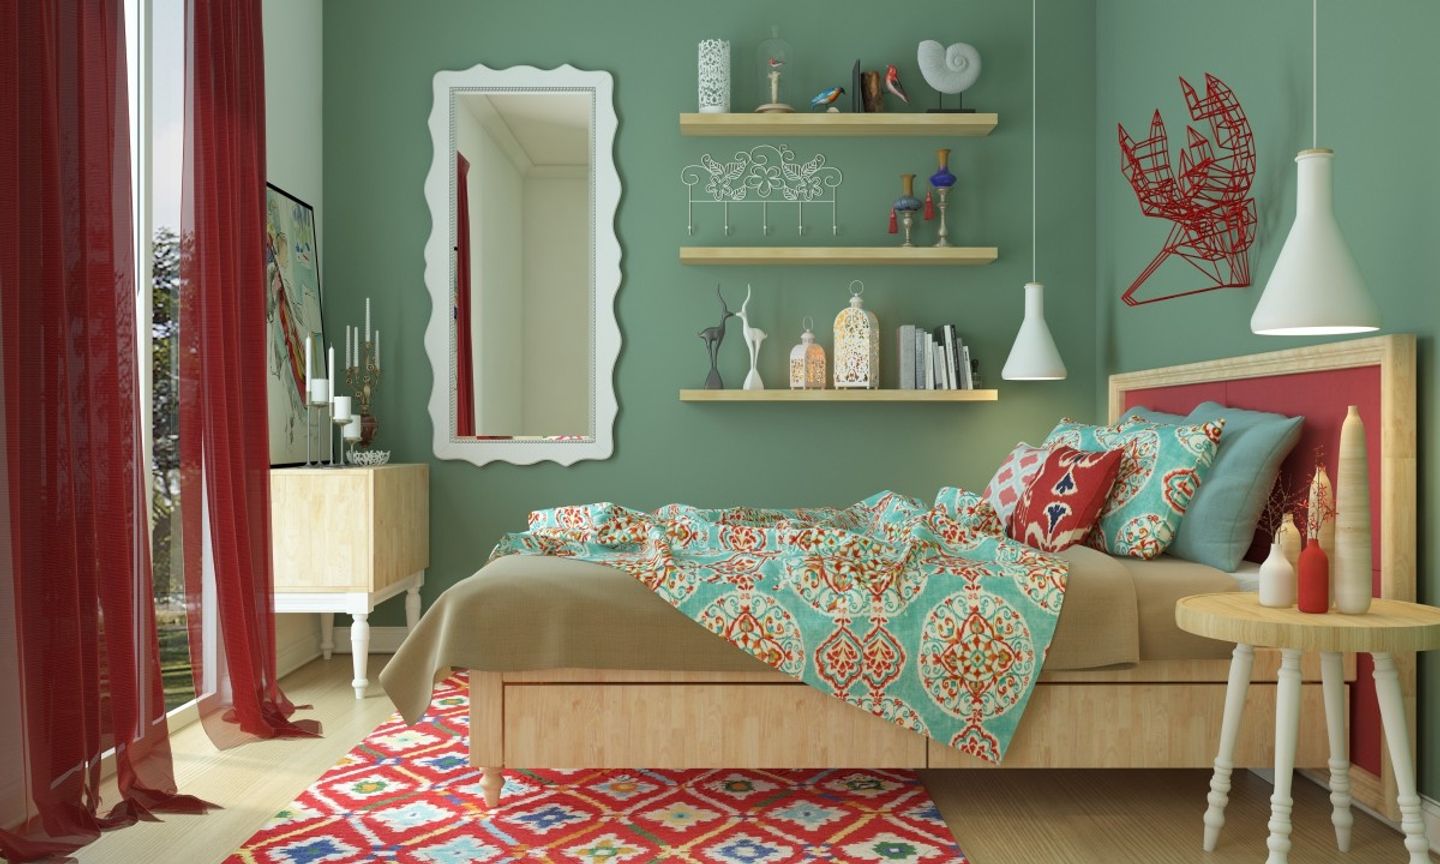 Eclectic Master Bedroom Design In Green And Cherry Red